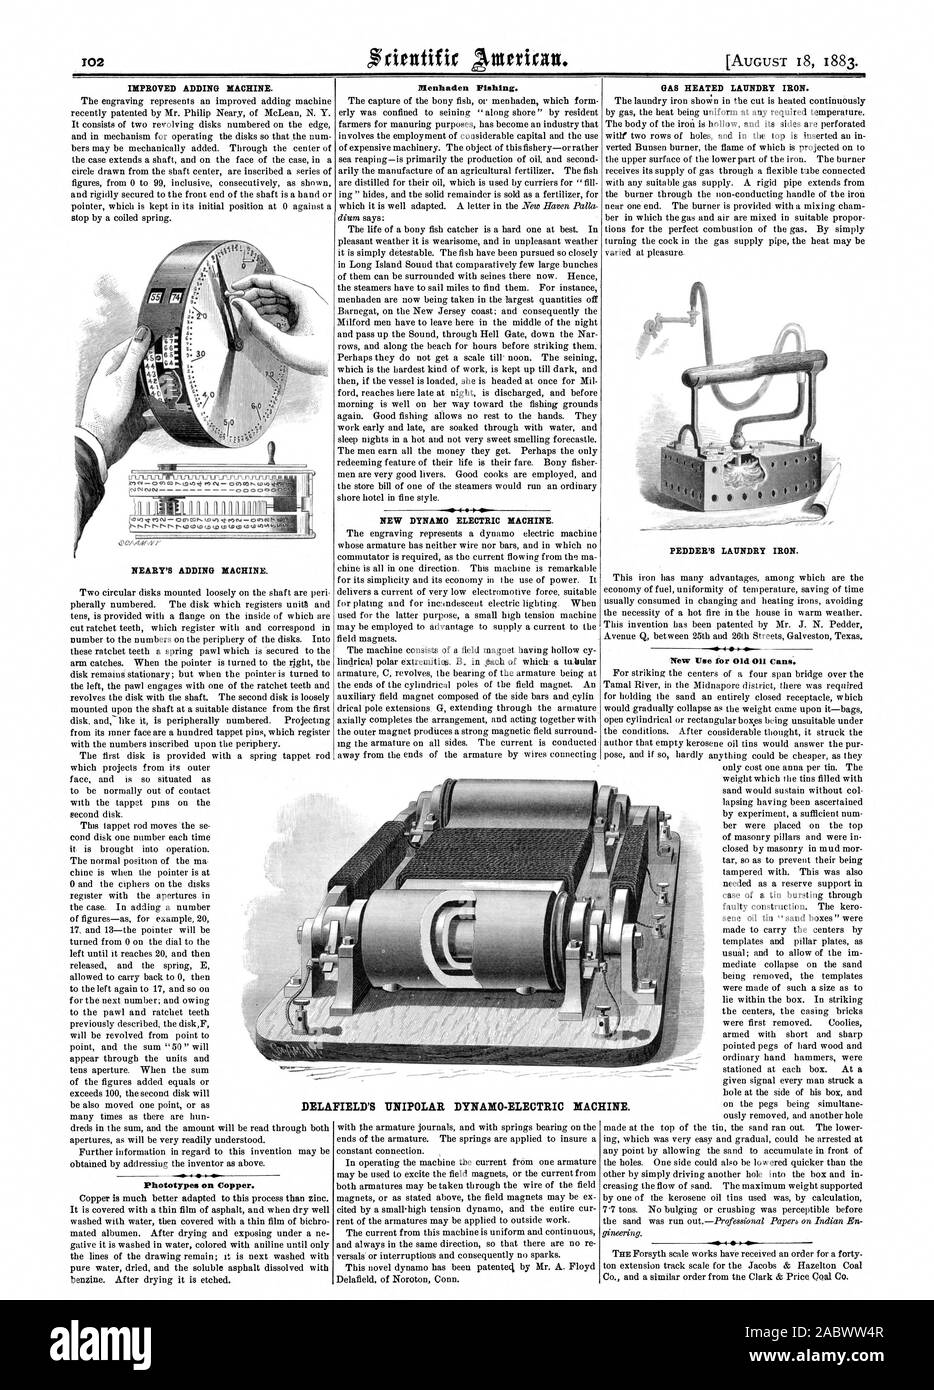 IMPROVED ADDING MACHINE. NEARY'S ADDING MACHINE. Phototype s on Copper. Menhaden Fishing. NEW DYNAMO ELECTRIC MACHINE. GAS HEATED LAUNDRY IRON. PEDDER% LAUNDRY IRON. New Use for Old 0 Cana. DELAFIELD'S UNIPOLAR DYNAMO-ELECTRIC MACHINE., scientific american, 1883-08-18 Stock Photo